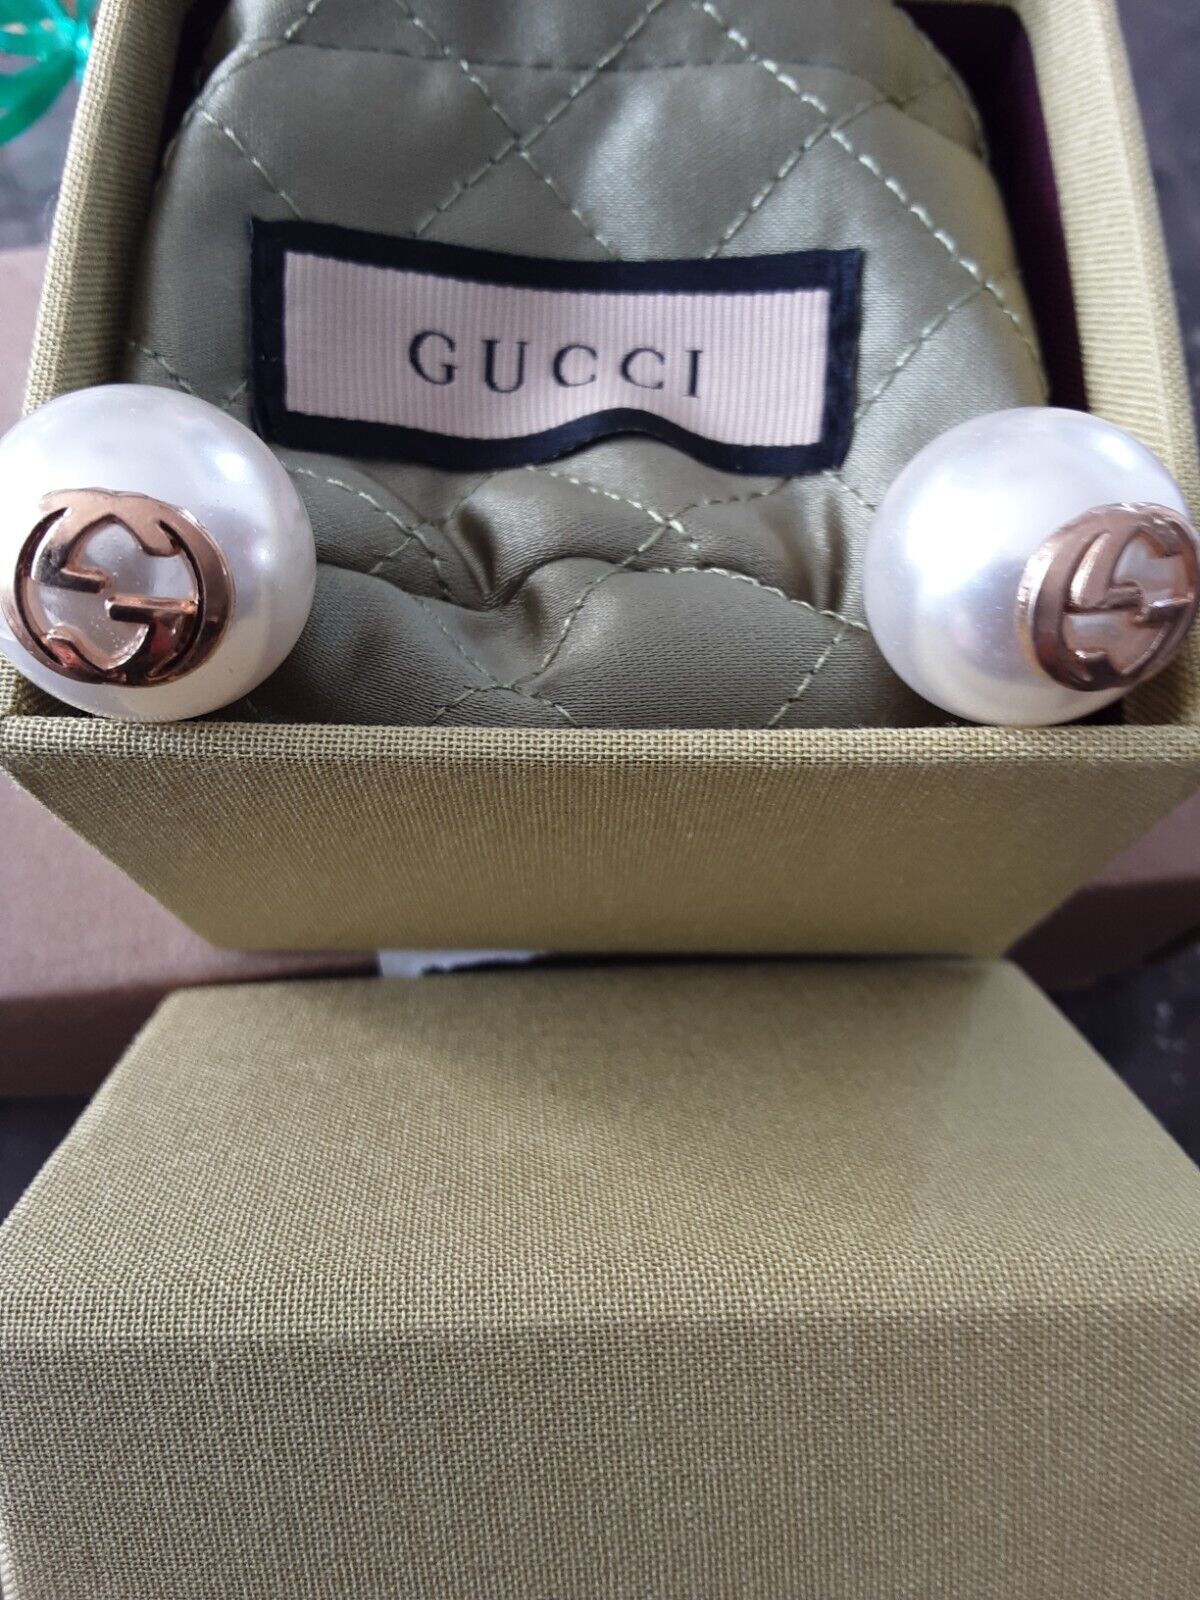 Gucci  buttons  Lot of 2  size 22 mm 0,8  inch   gold & Pearls